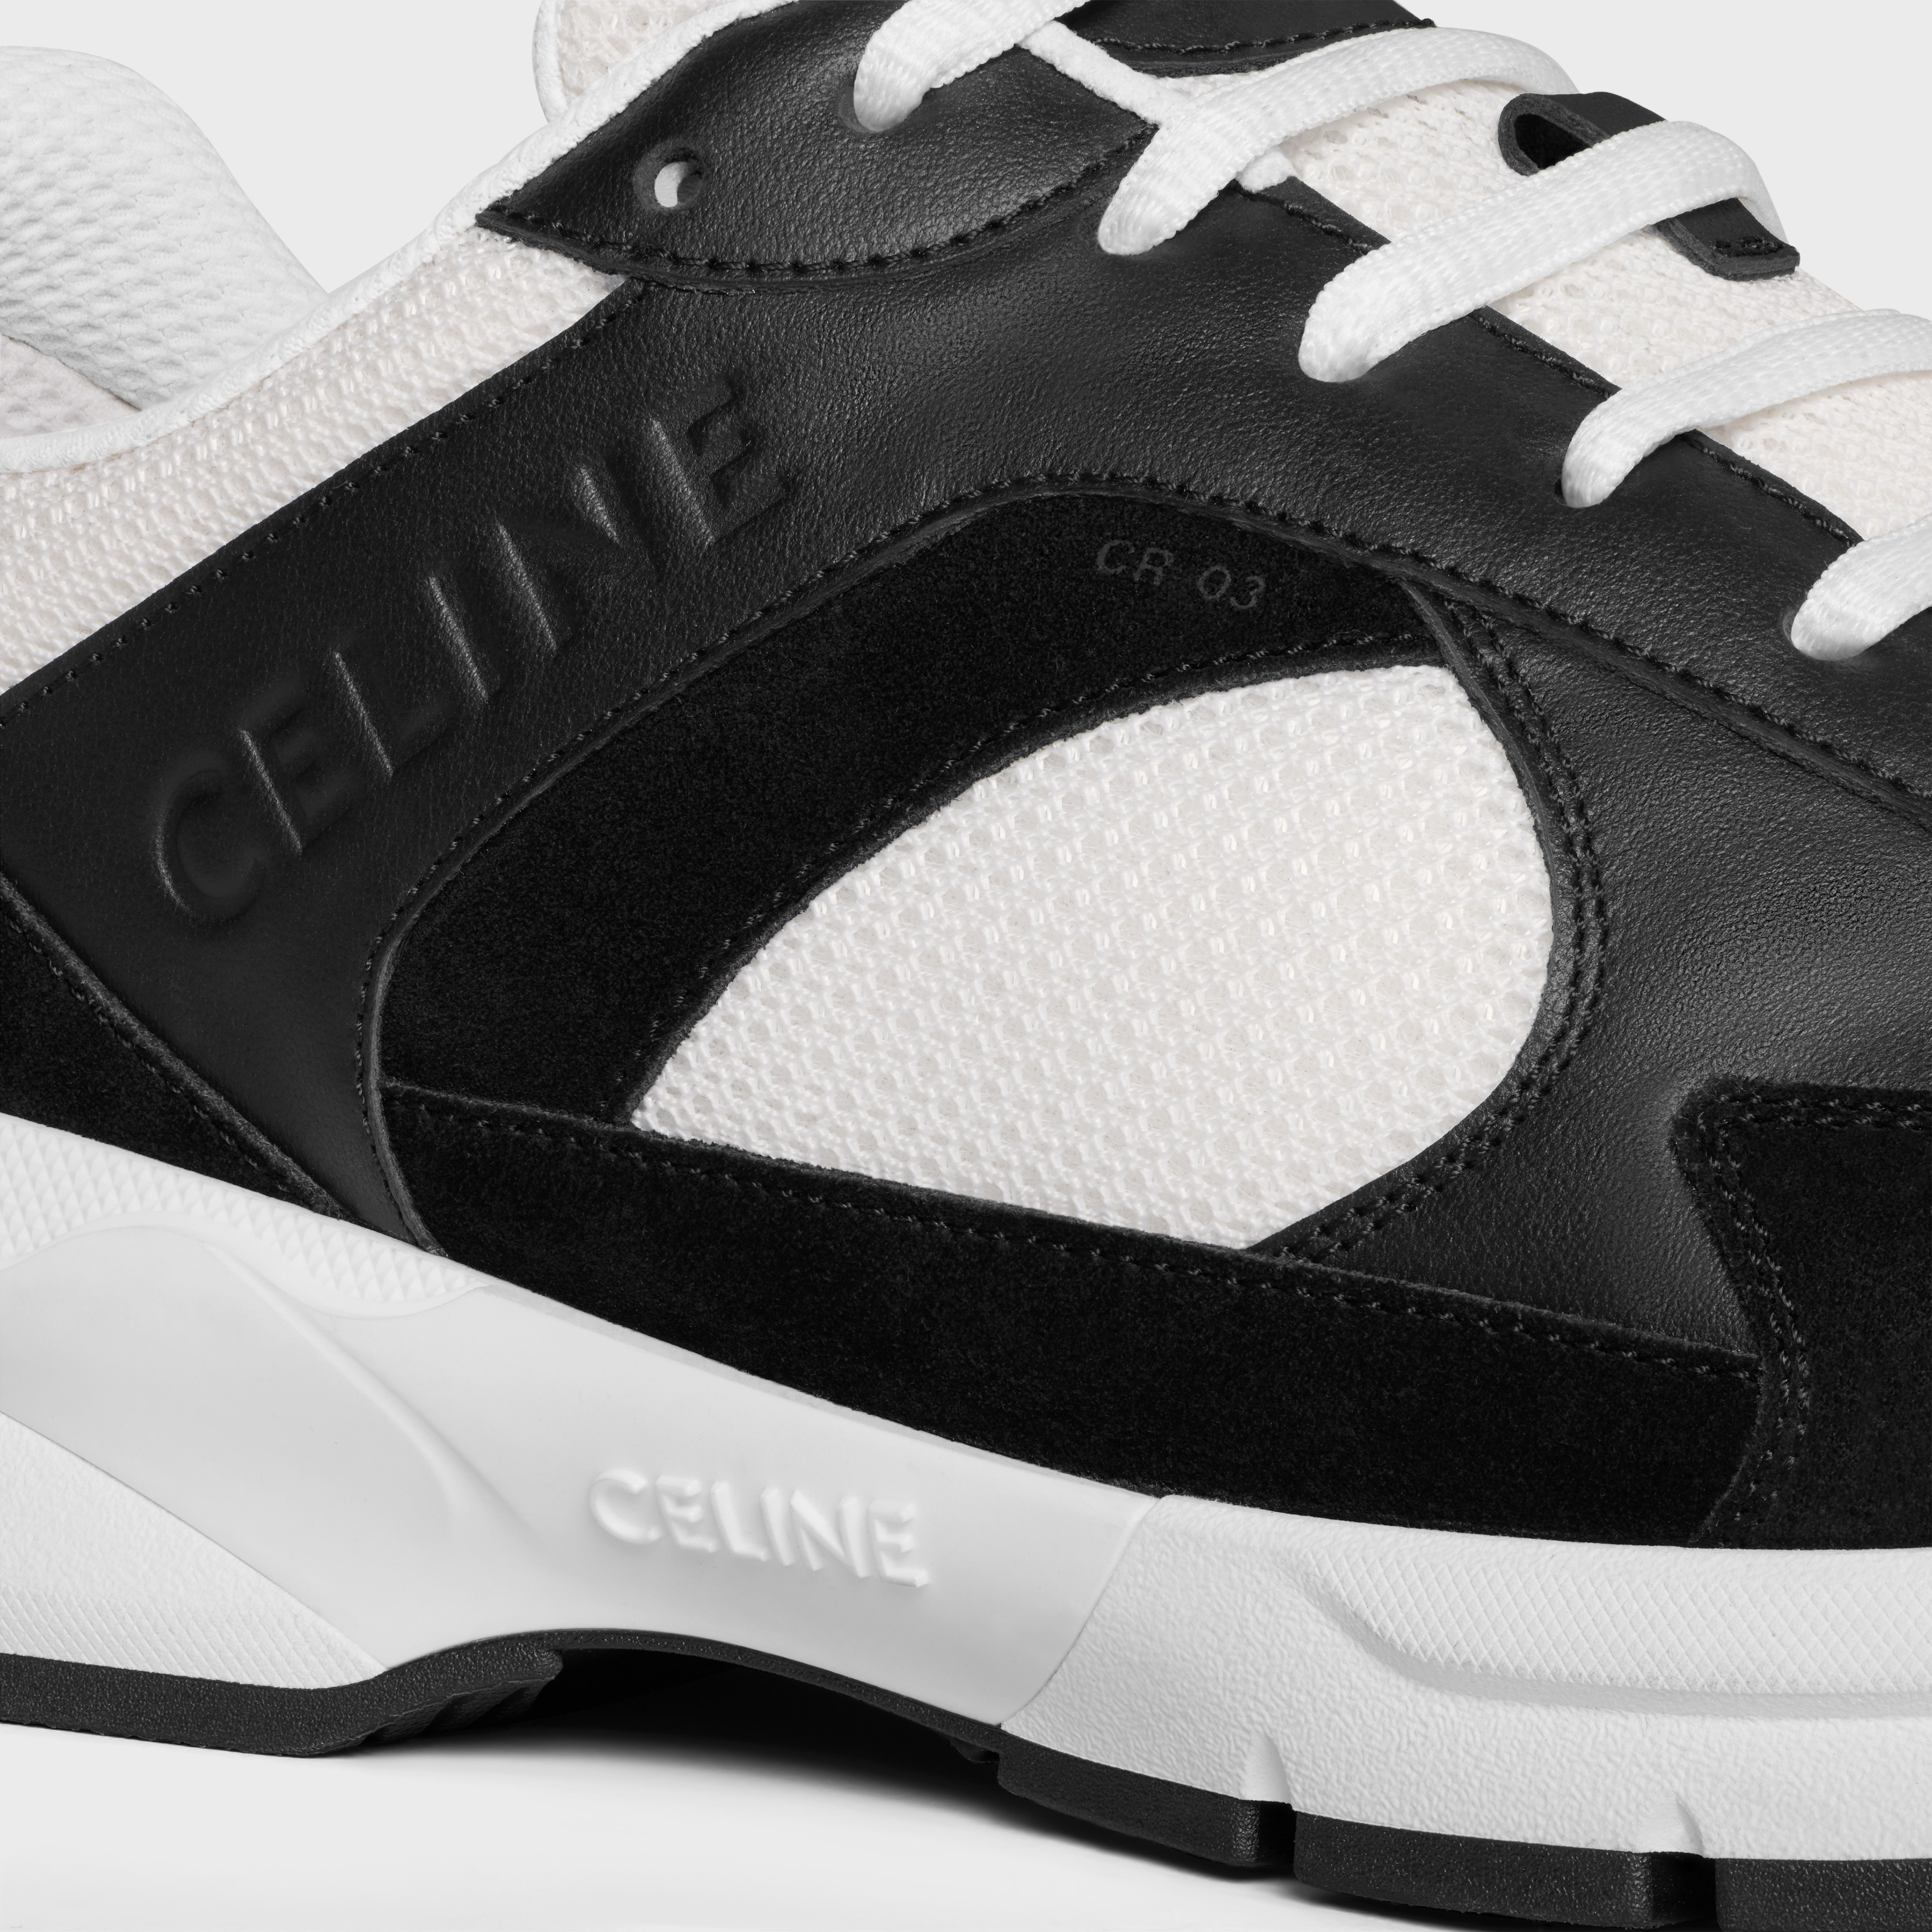 CELINE RUNNER CR-03 LOW LACE-UP SNEAKER in MESH, CALFSKIN AND SUEDE CALFSKIN - 5